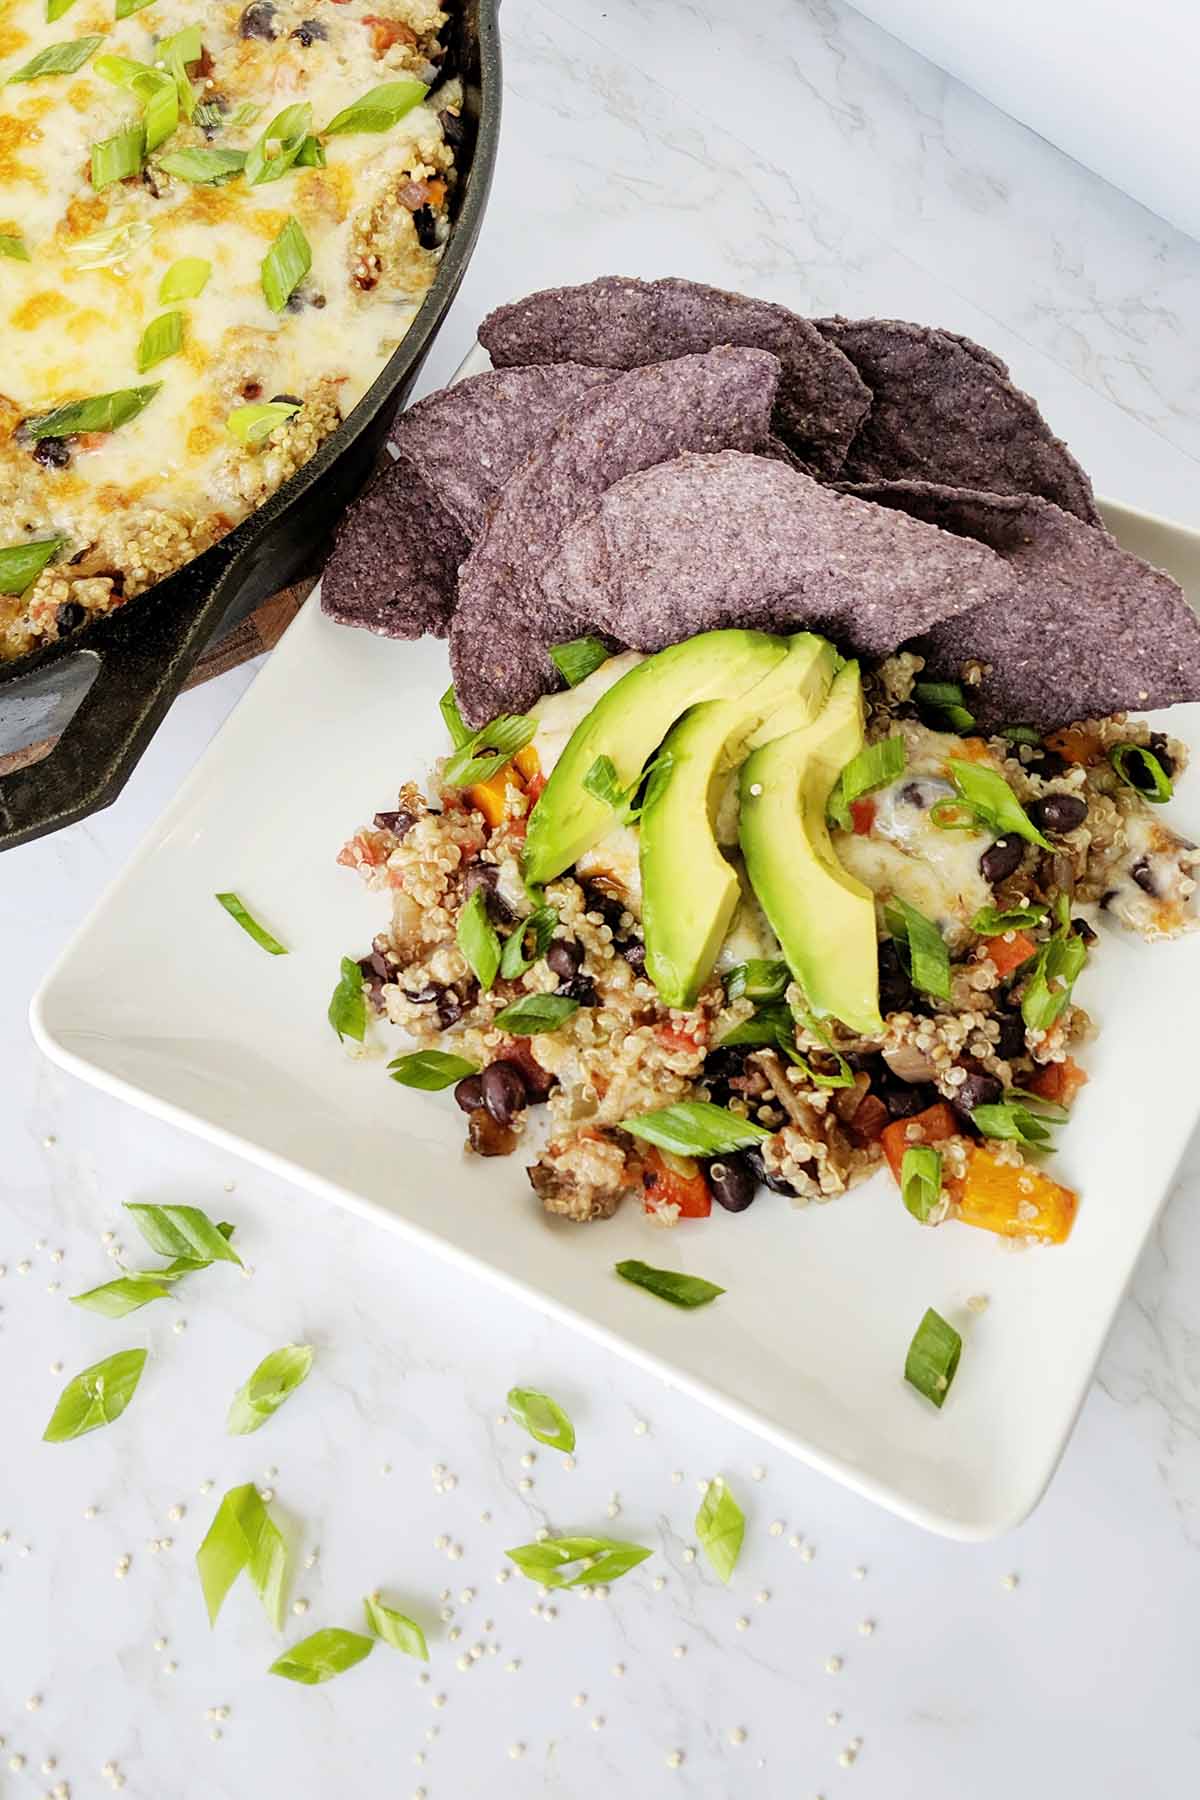 Vegetarian quinoa bake topped with avocado and tortilla chips